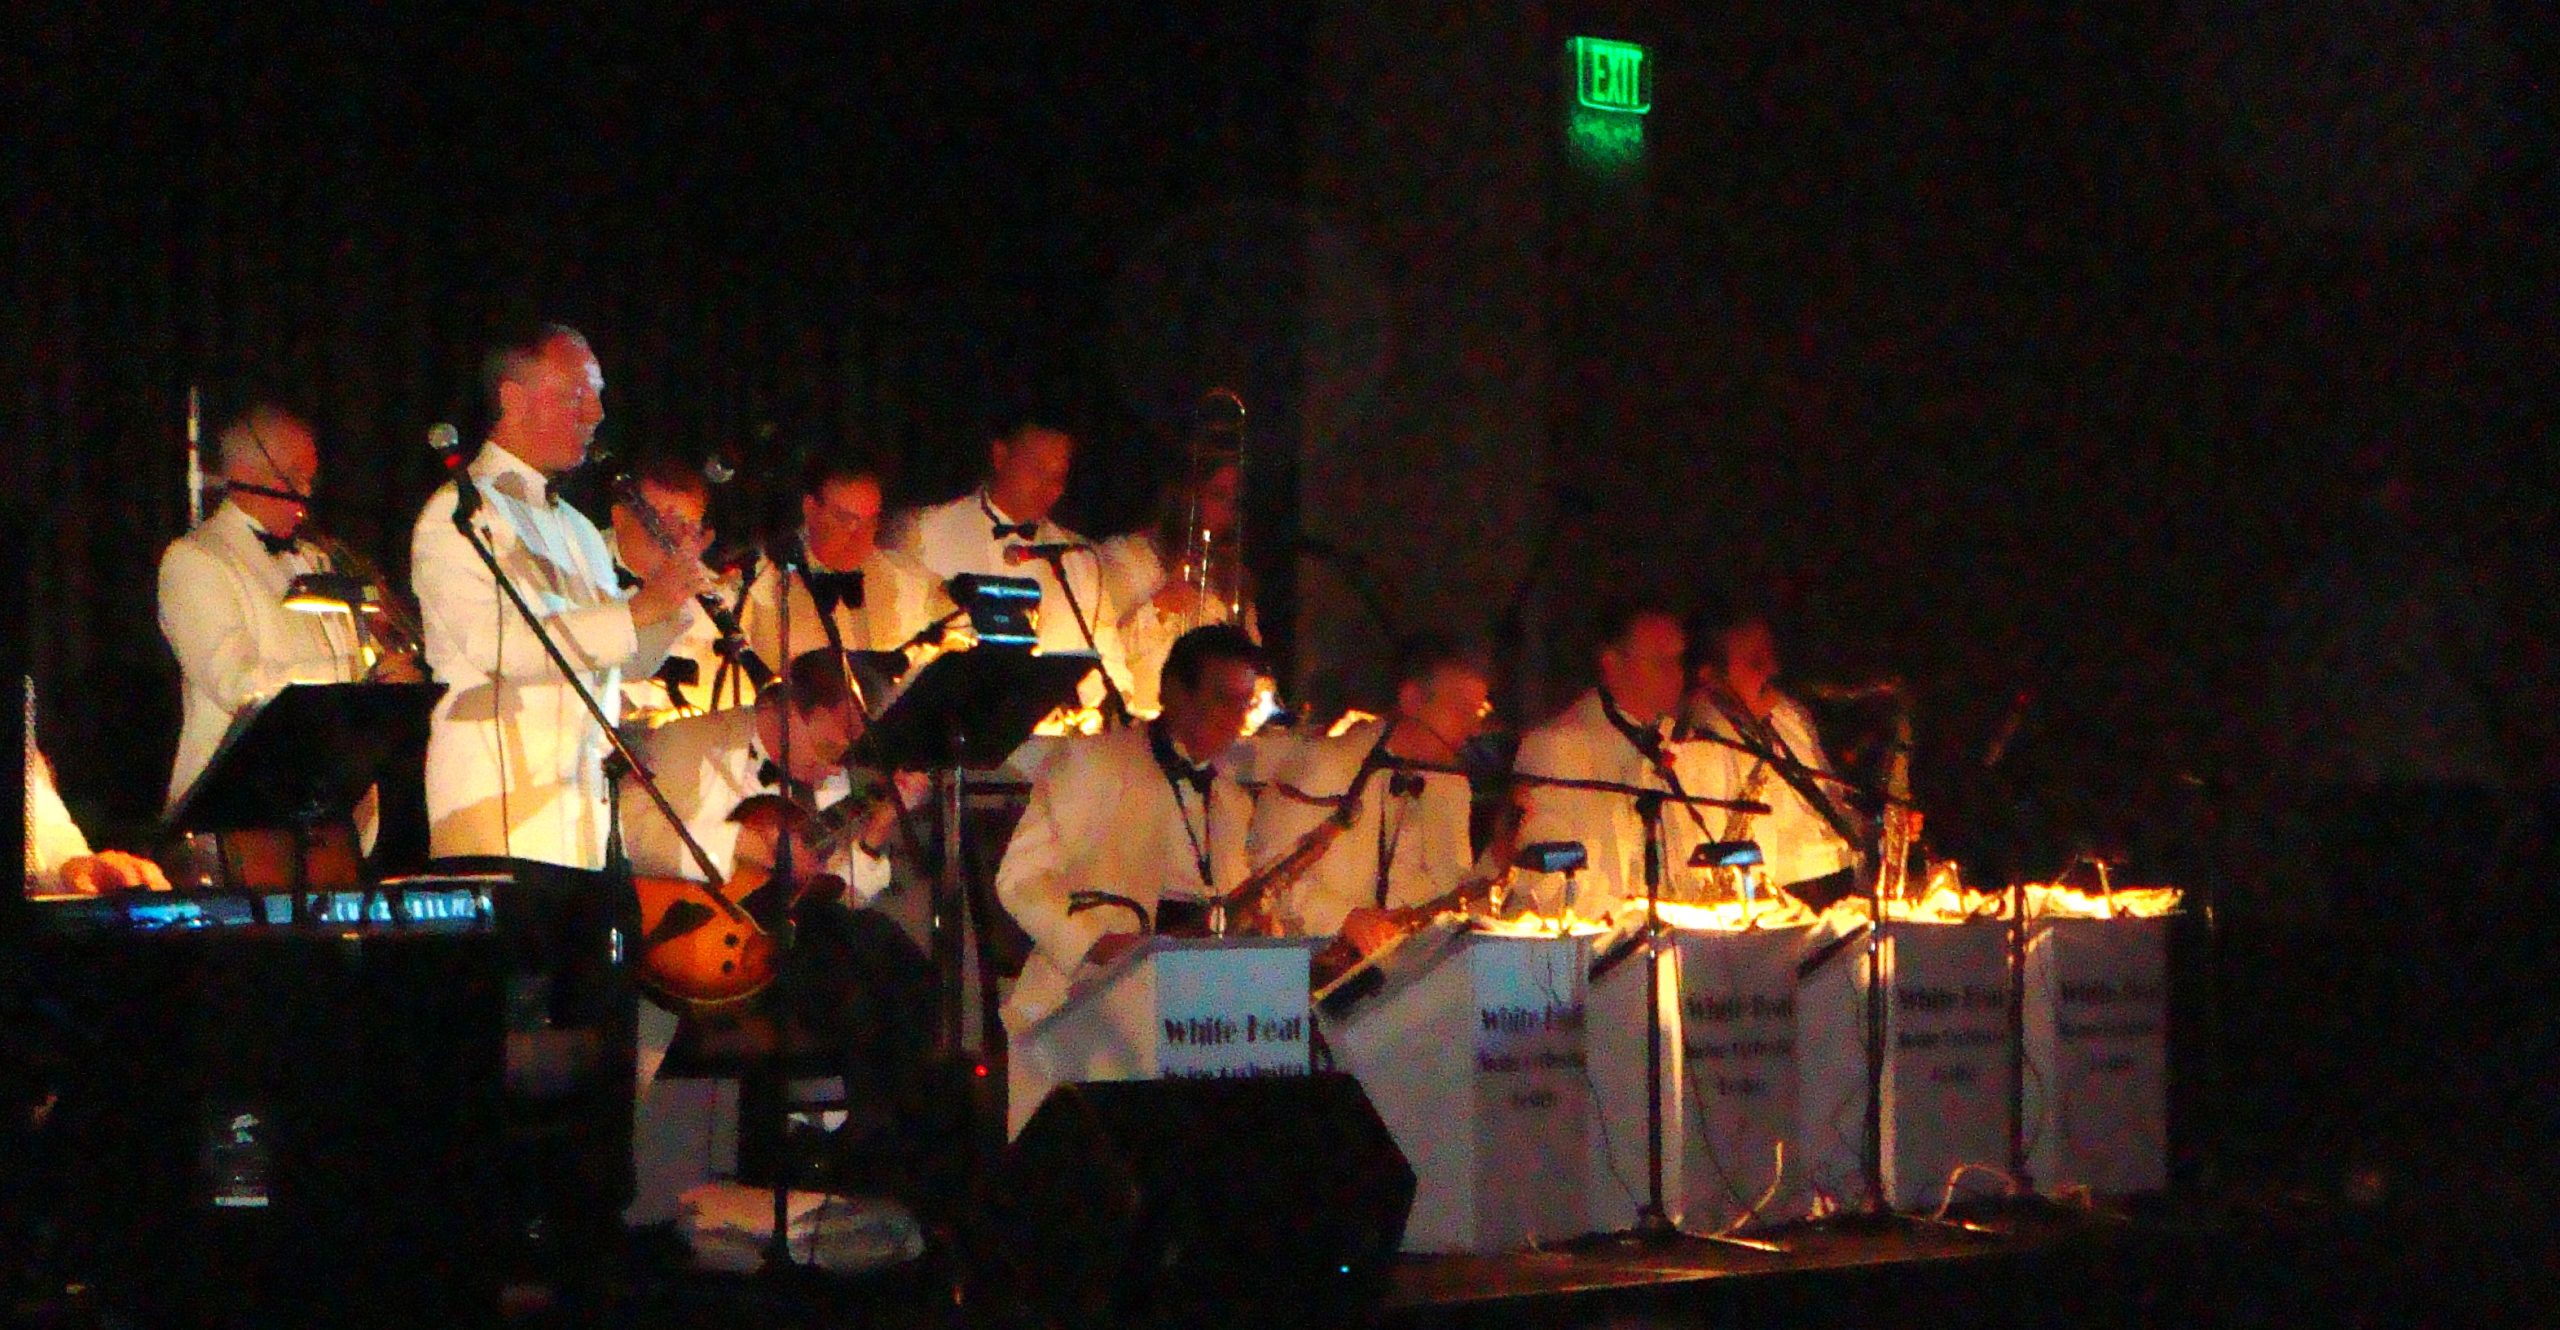 Photograph of White Heat Swing Orchestra